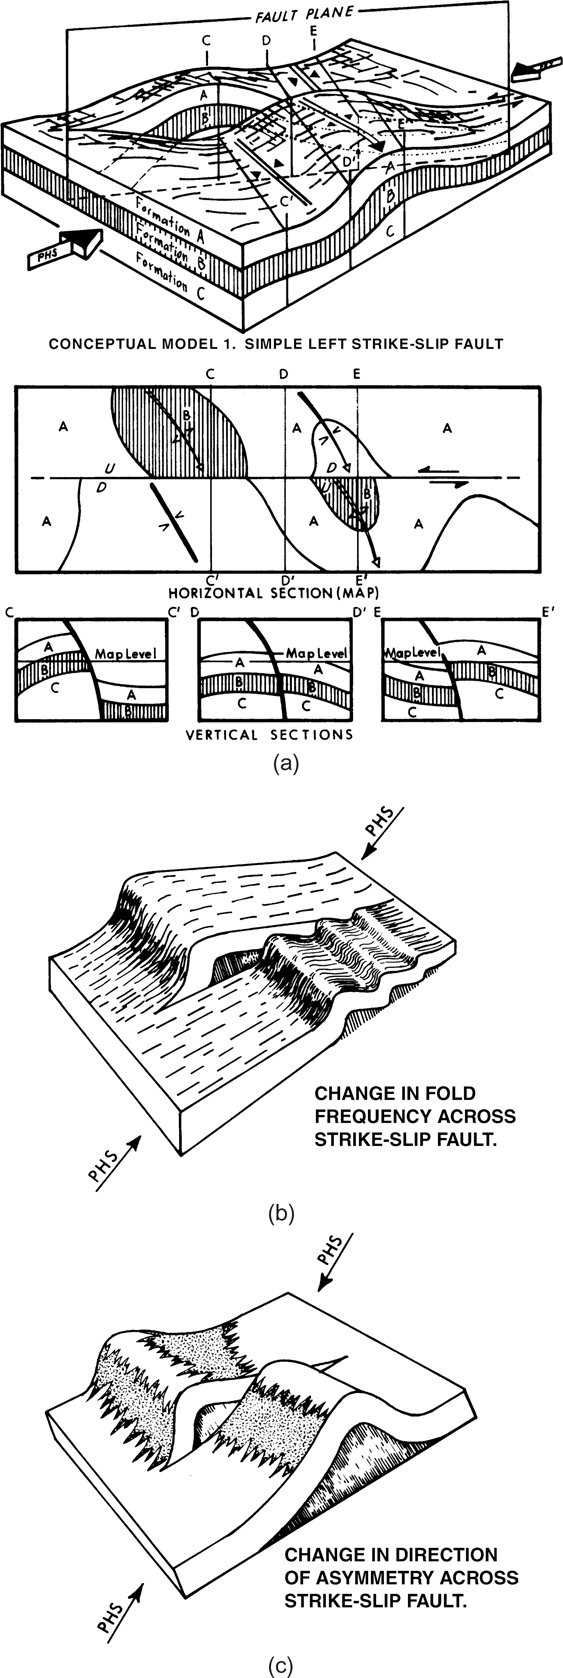 A figure shows the three dimensional model for the strike-slip fault.